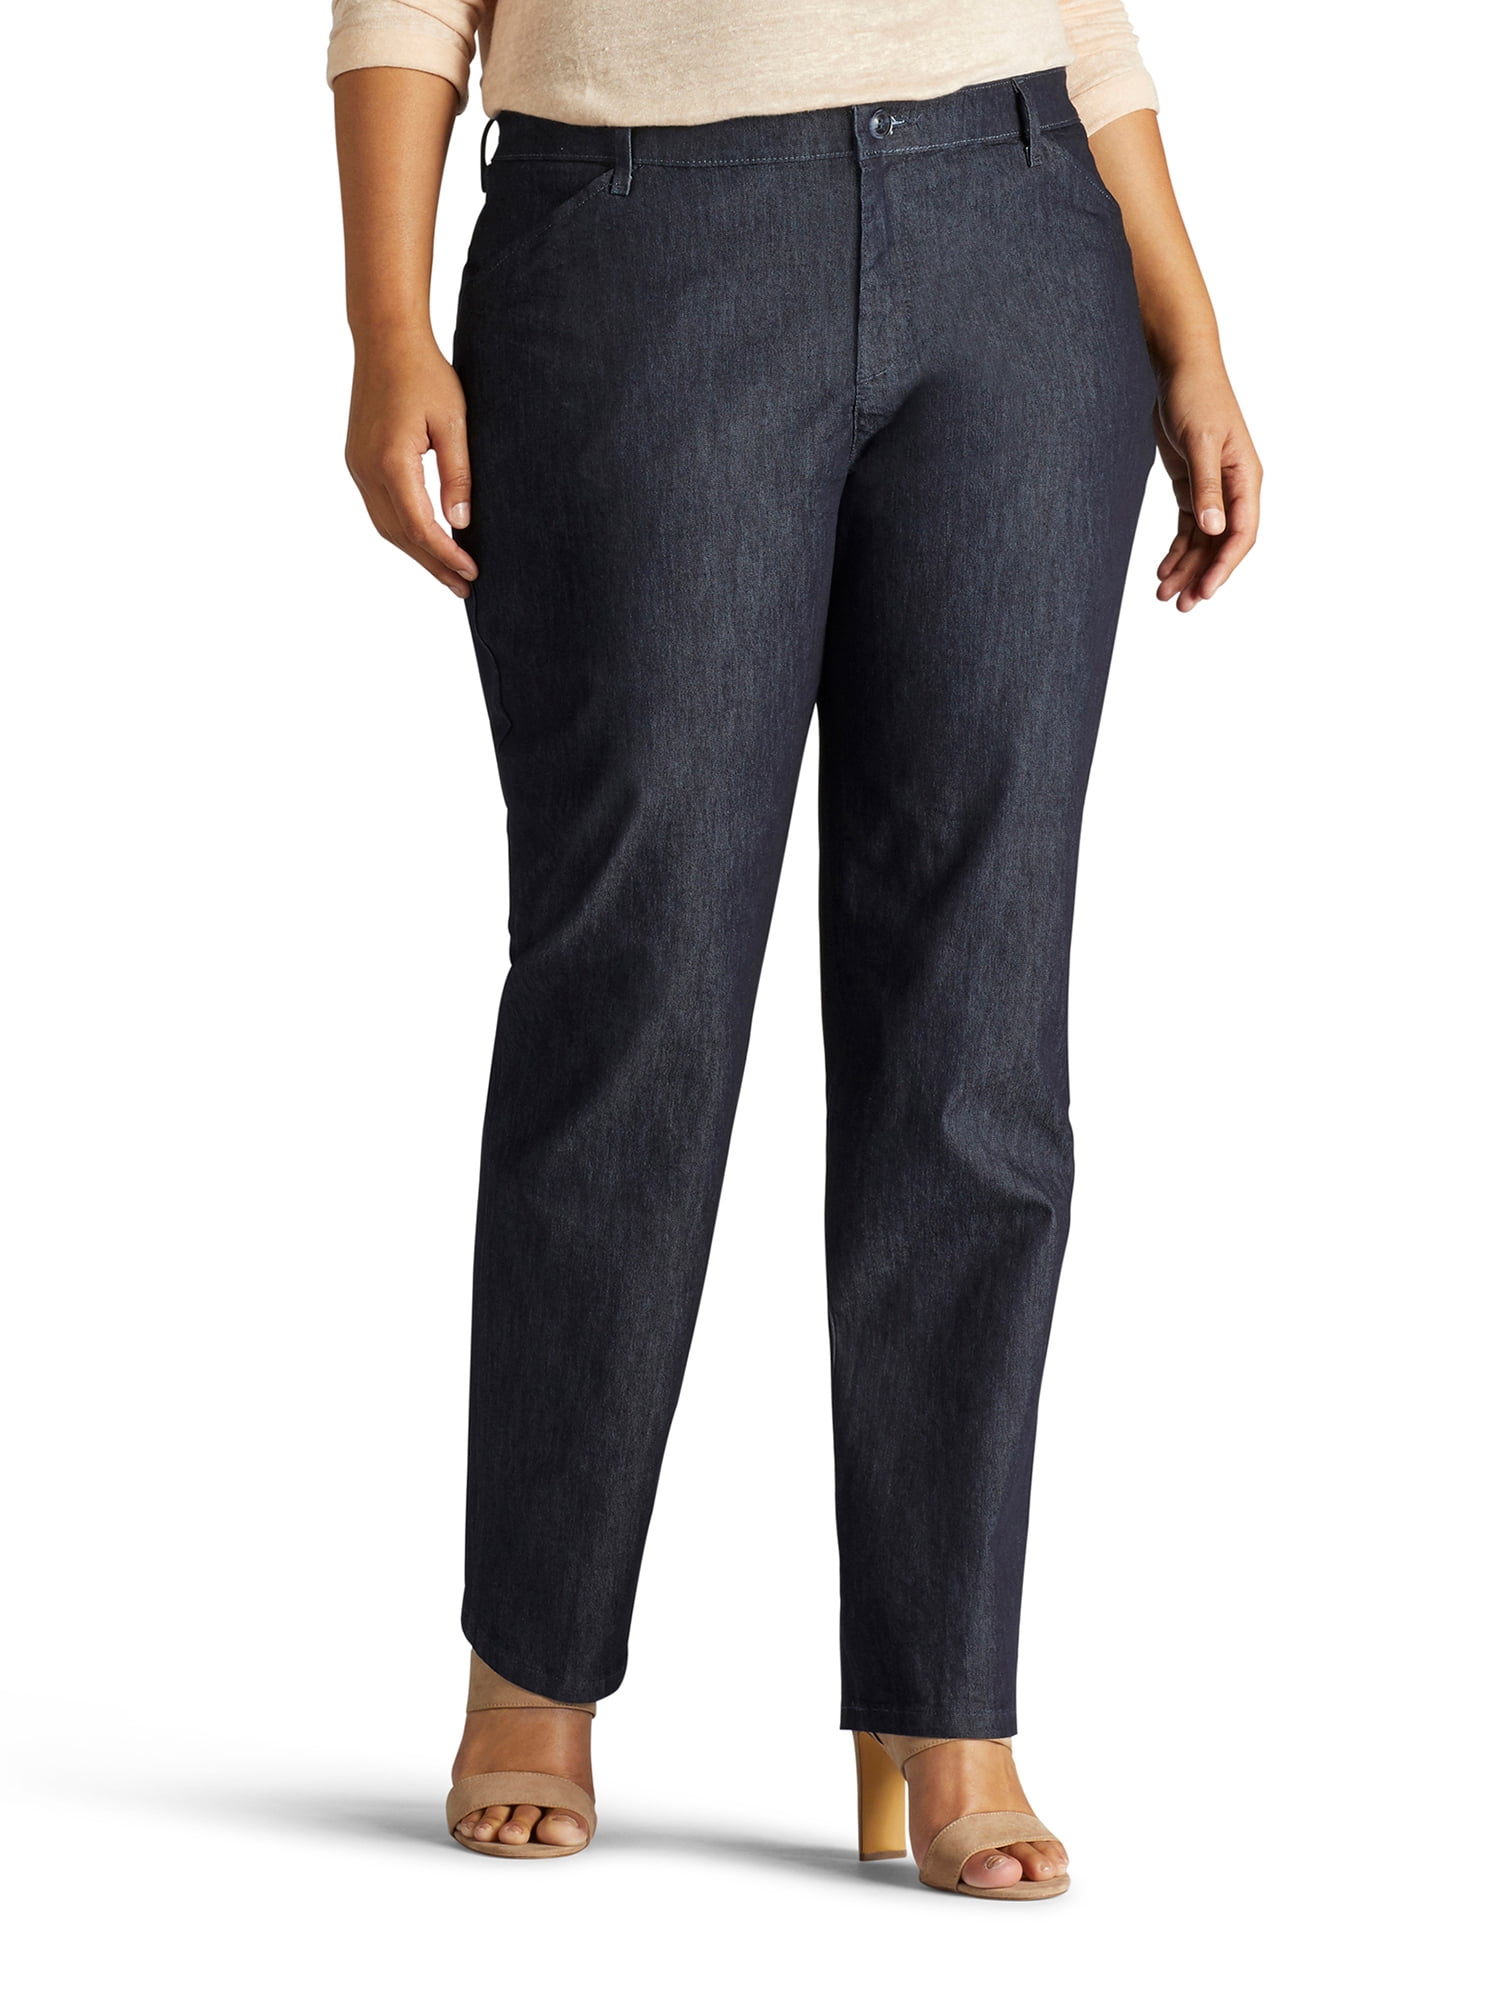 Lee Women's Plus Relaxed Fit Straight Leg Pants